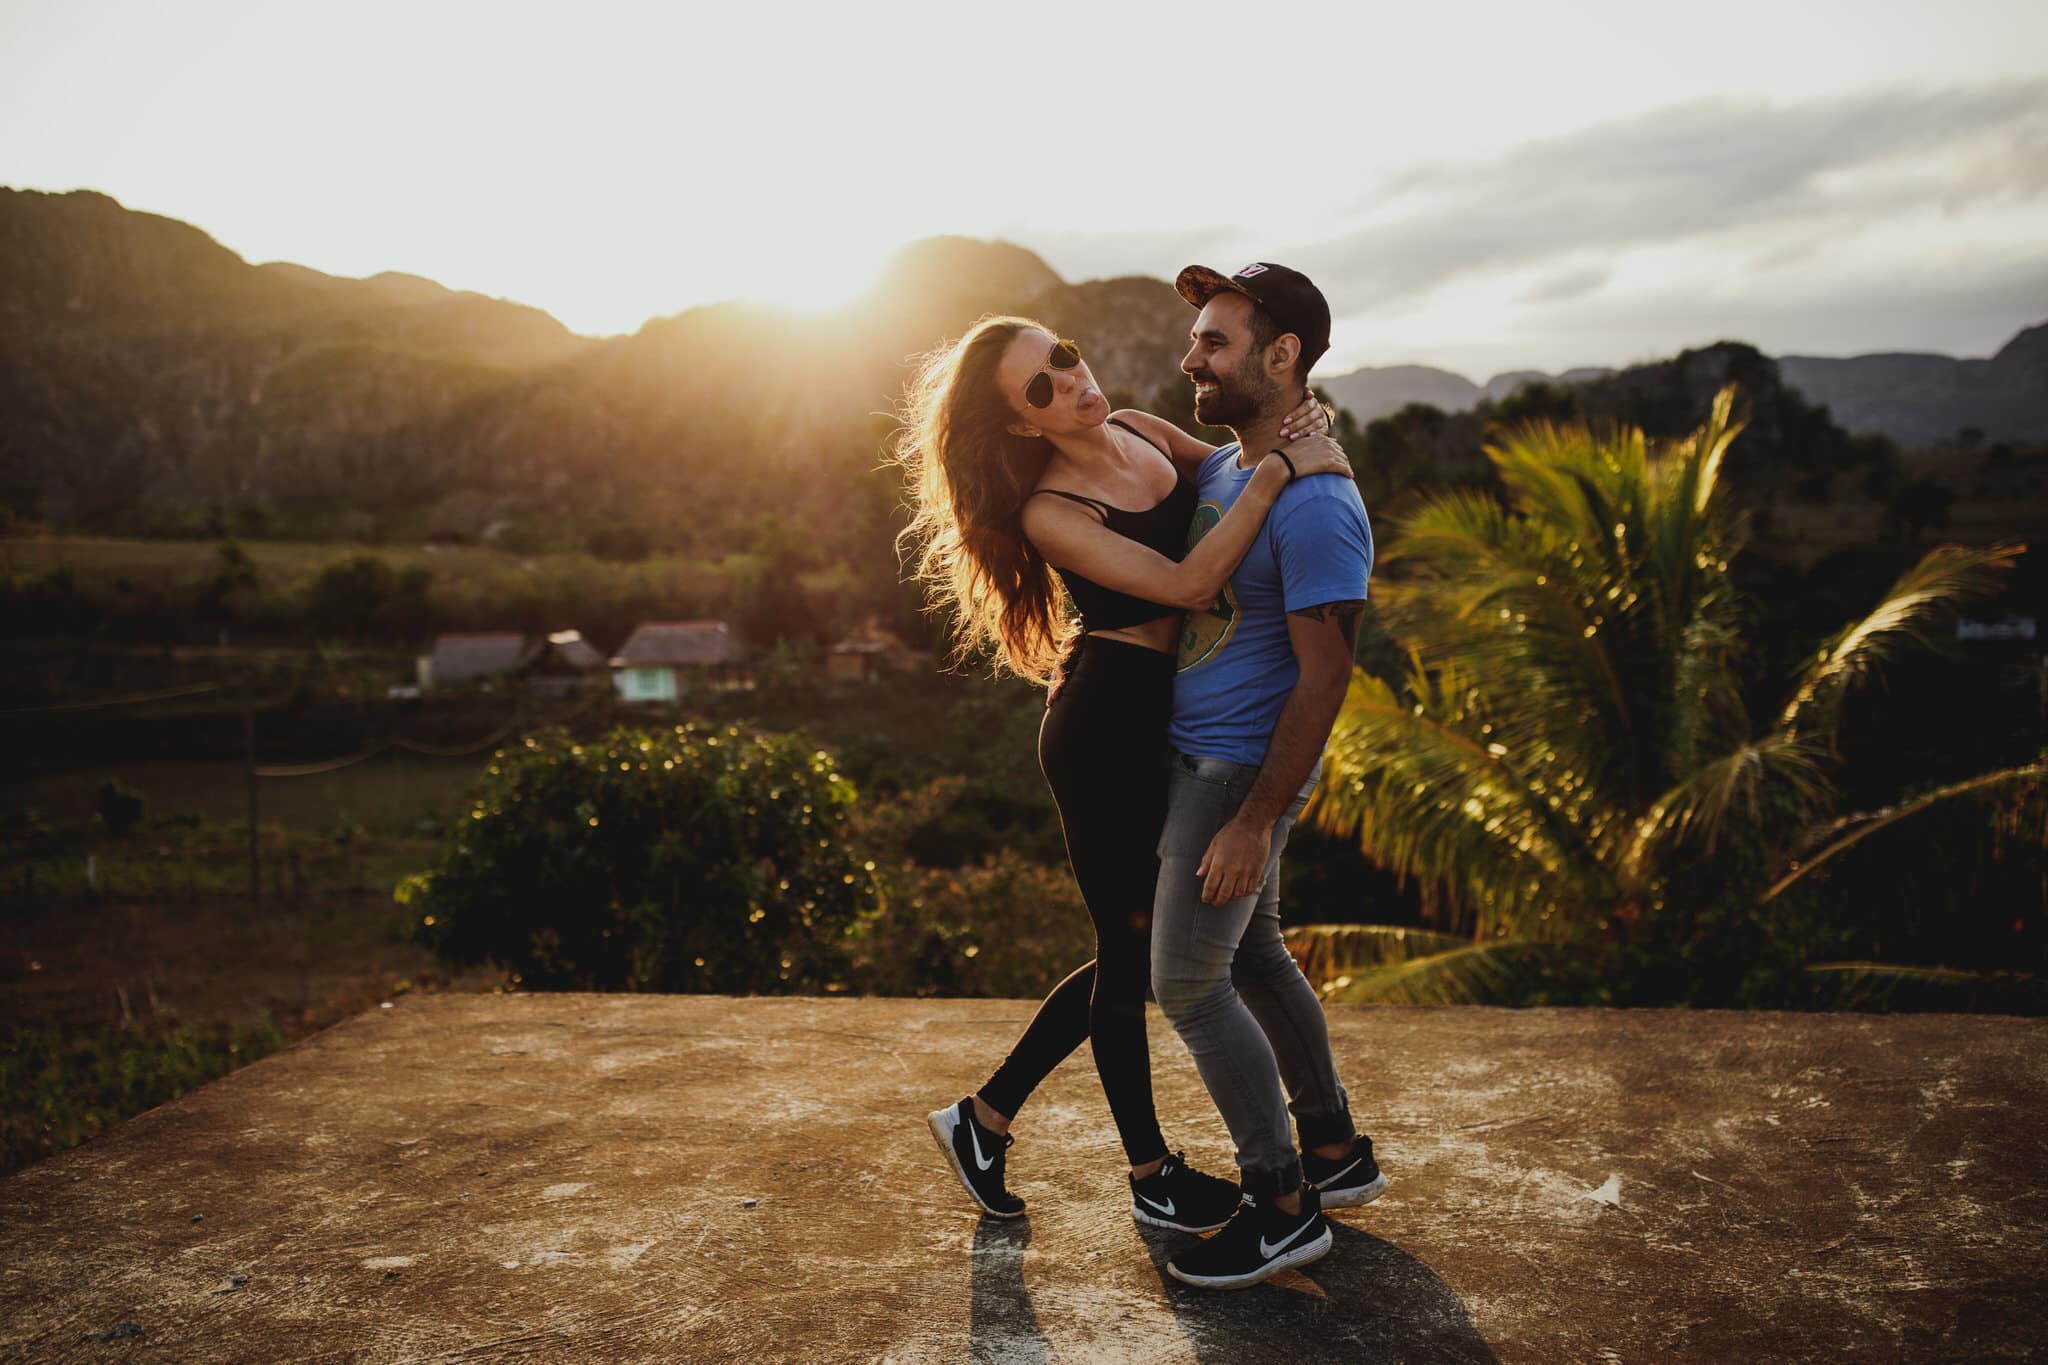 Dancing at sunset in Vinales, Cuba. Wedding and travel photographer Brent Calis.